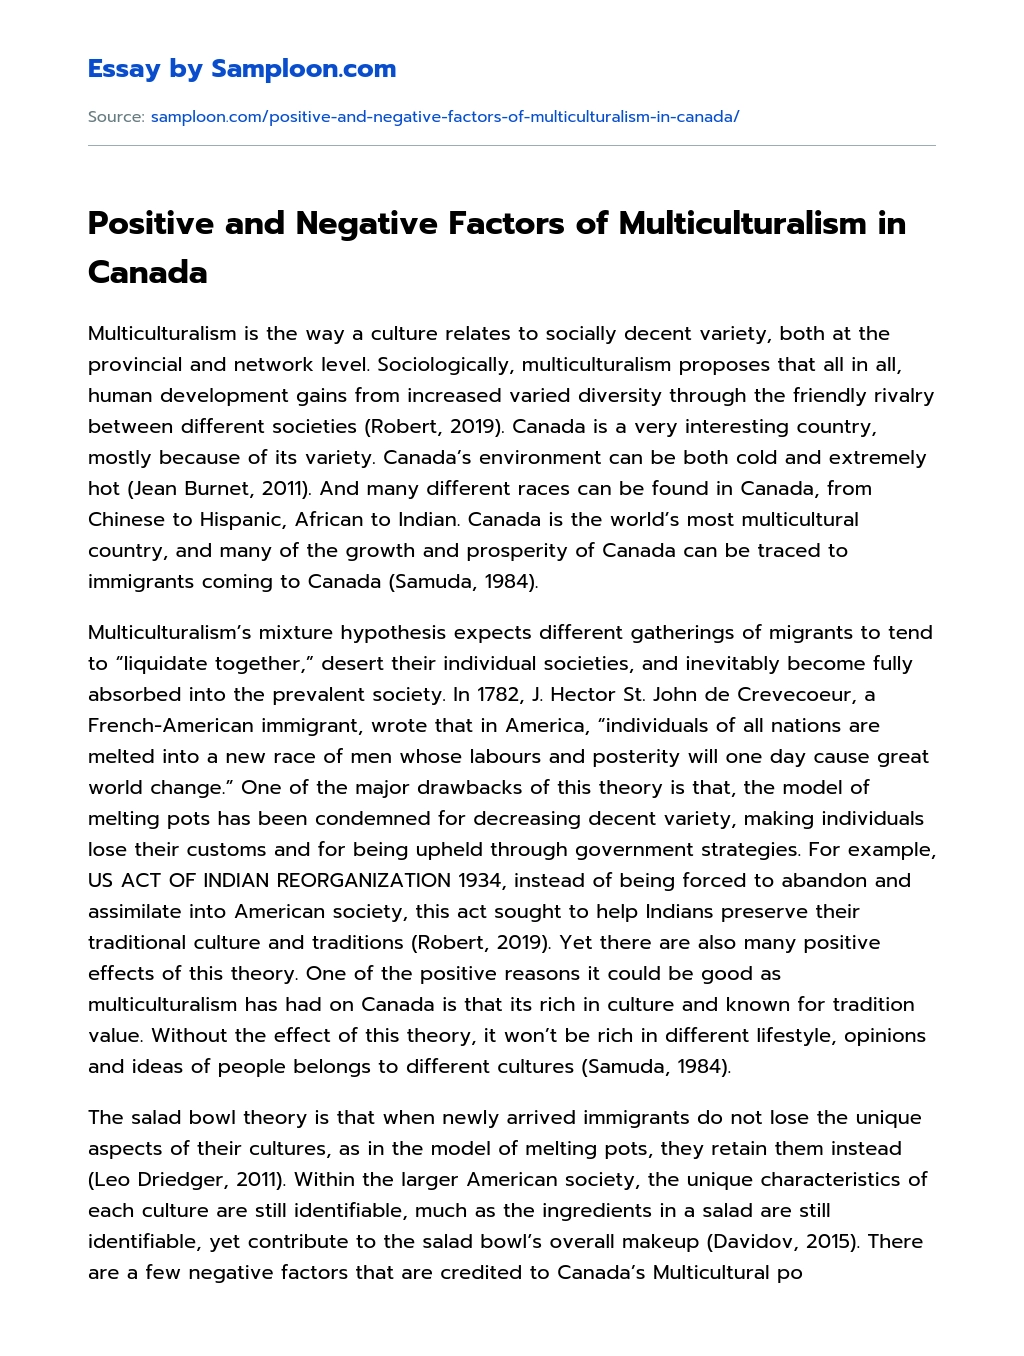 Positive and Negative Factors of Multiculturalism in Canada essay